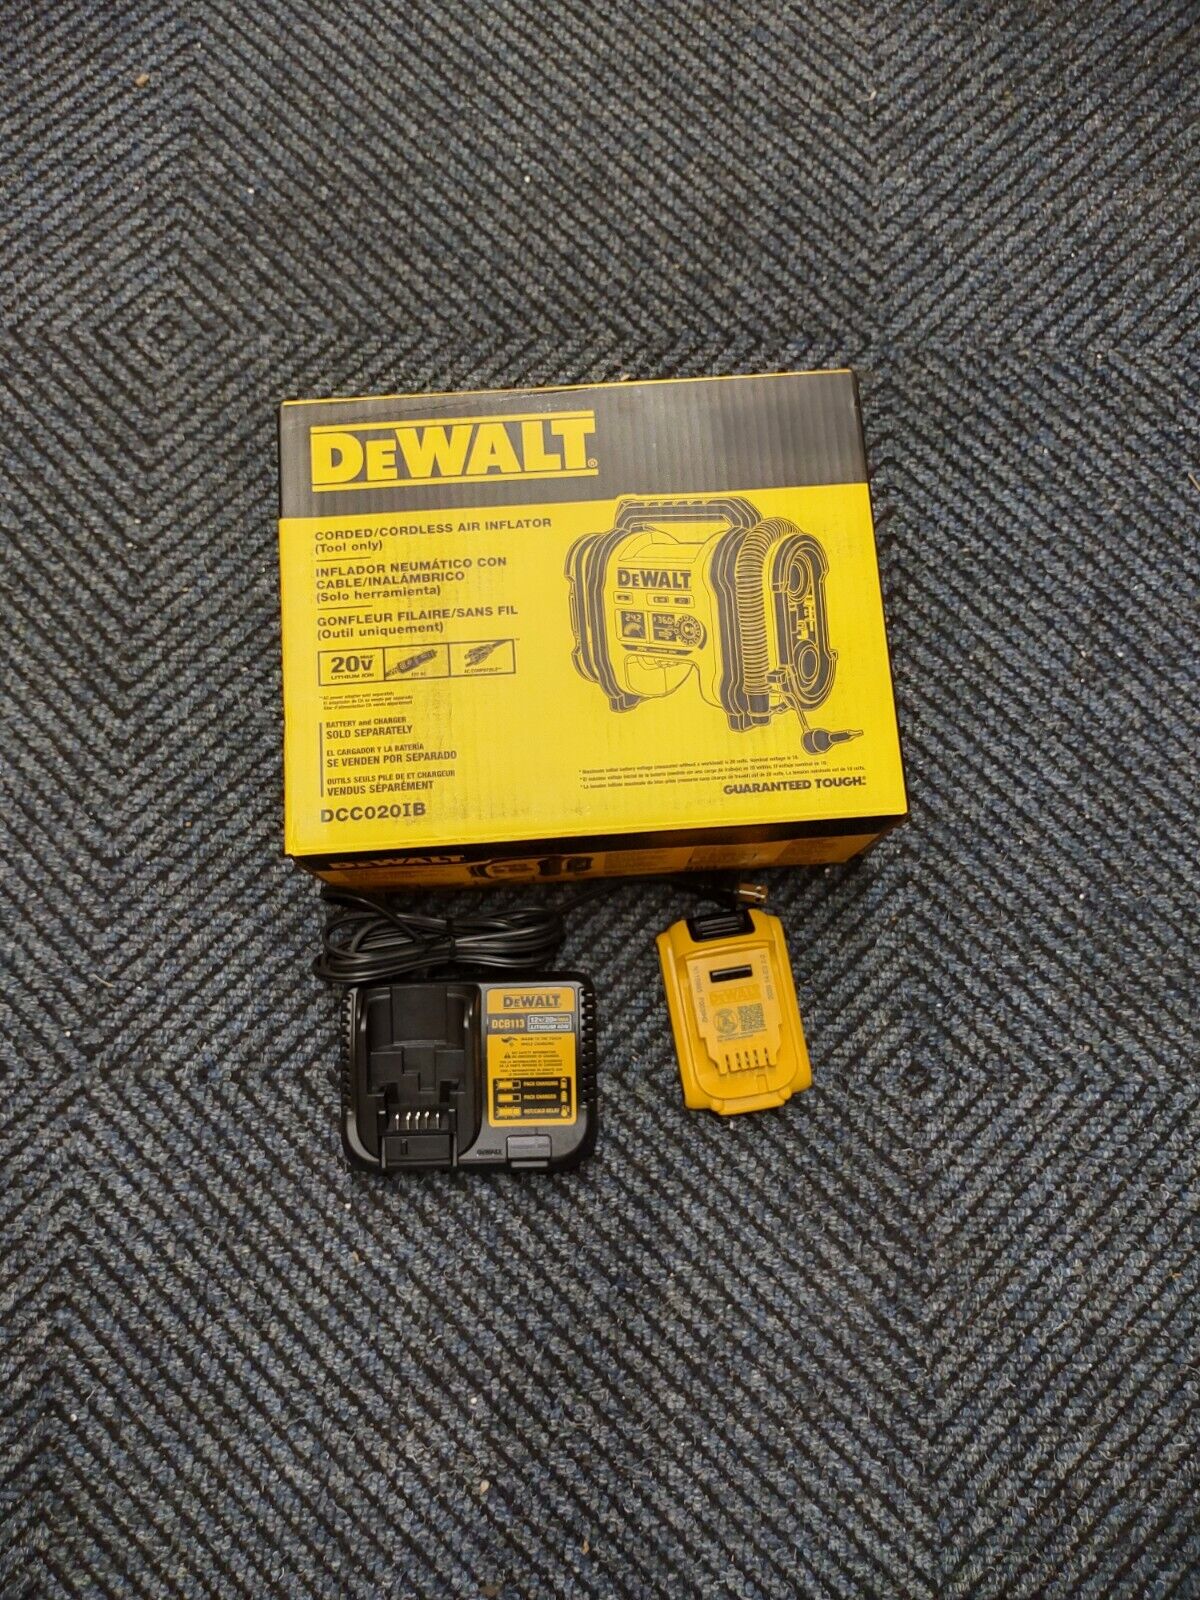 DEWALT dcc020ib HYBRID Corded/Cordless Air Inflator with Battery and charger